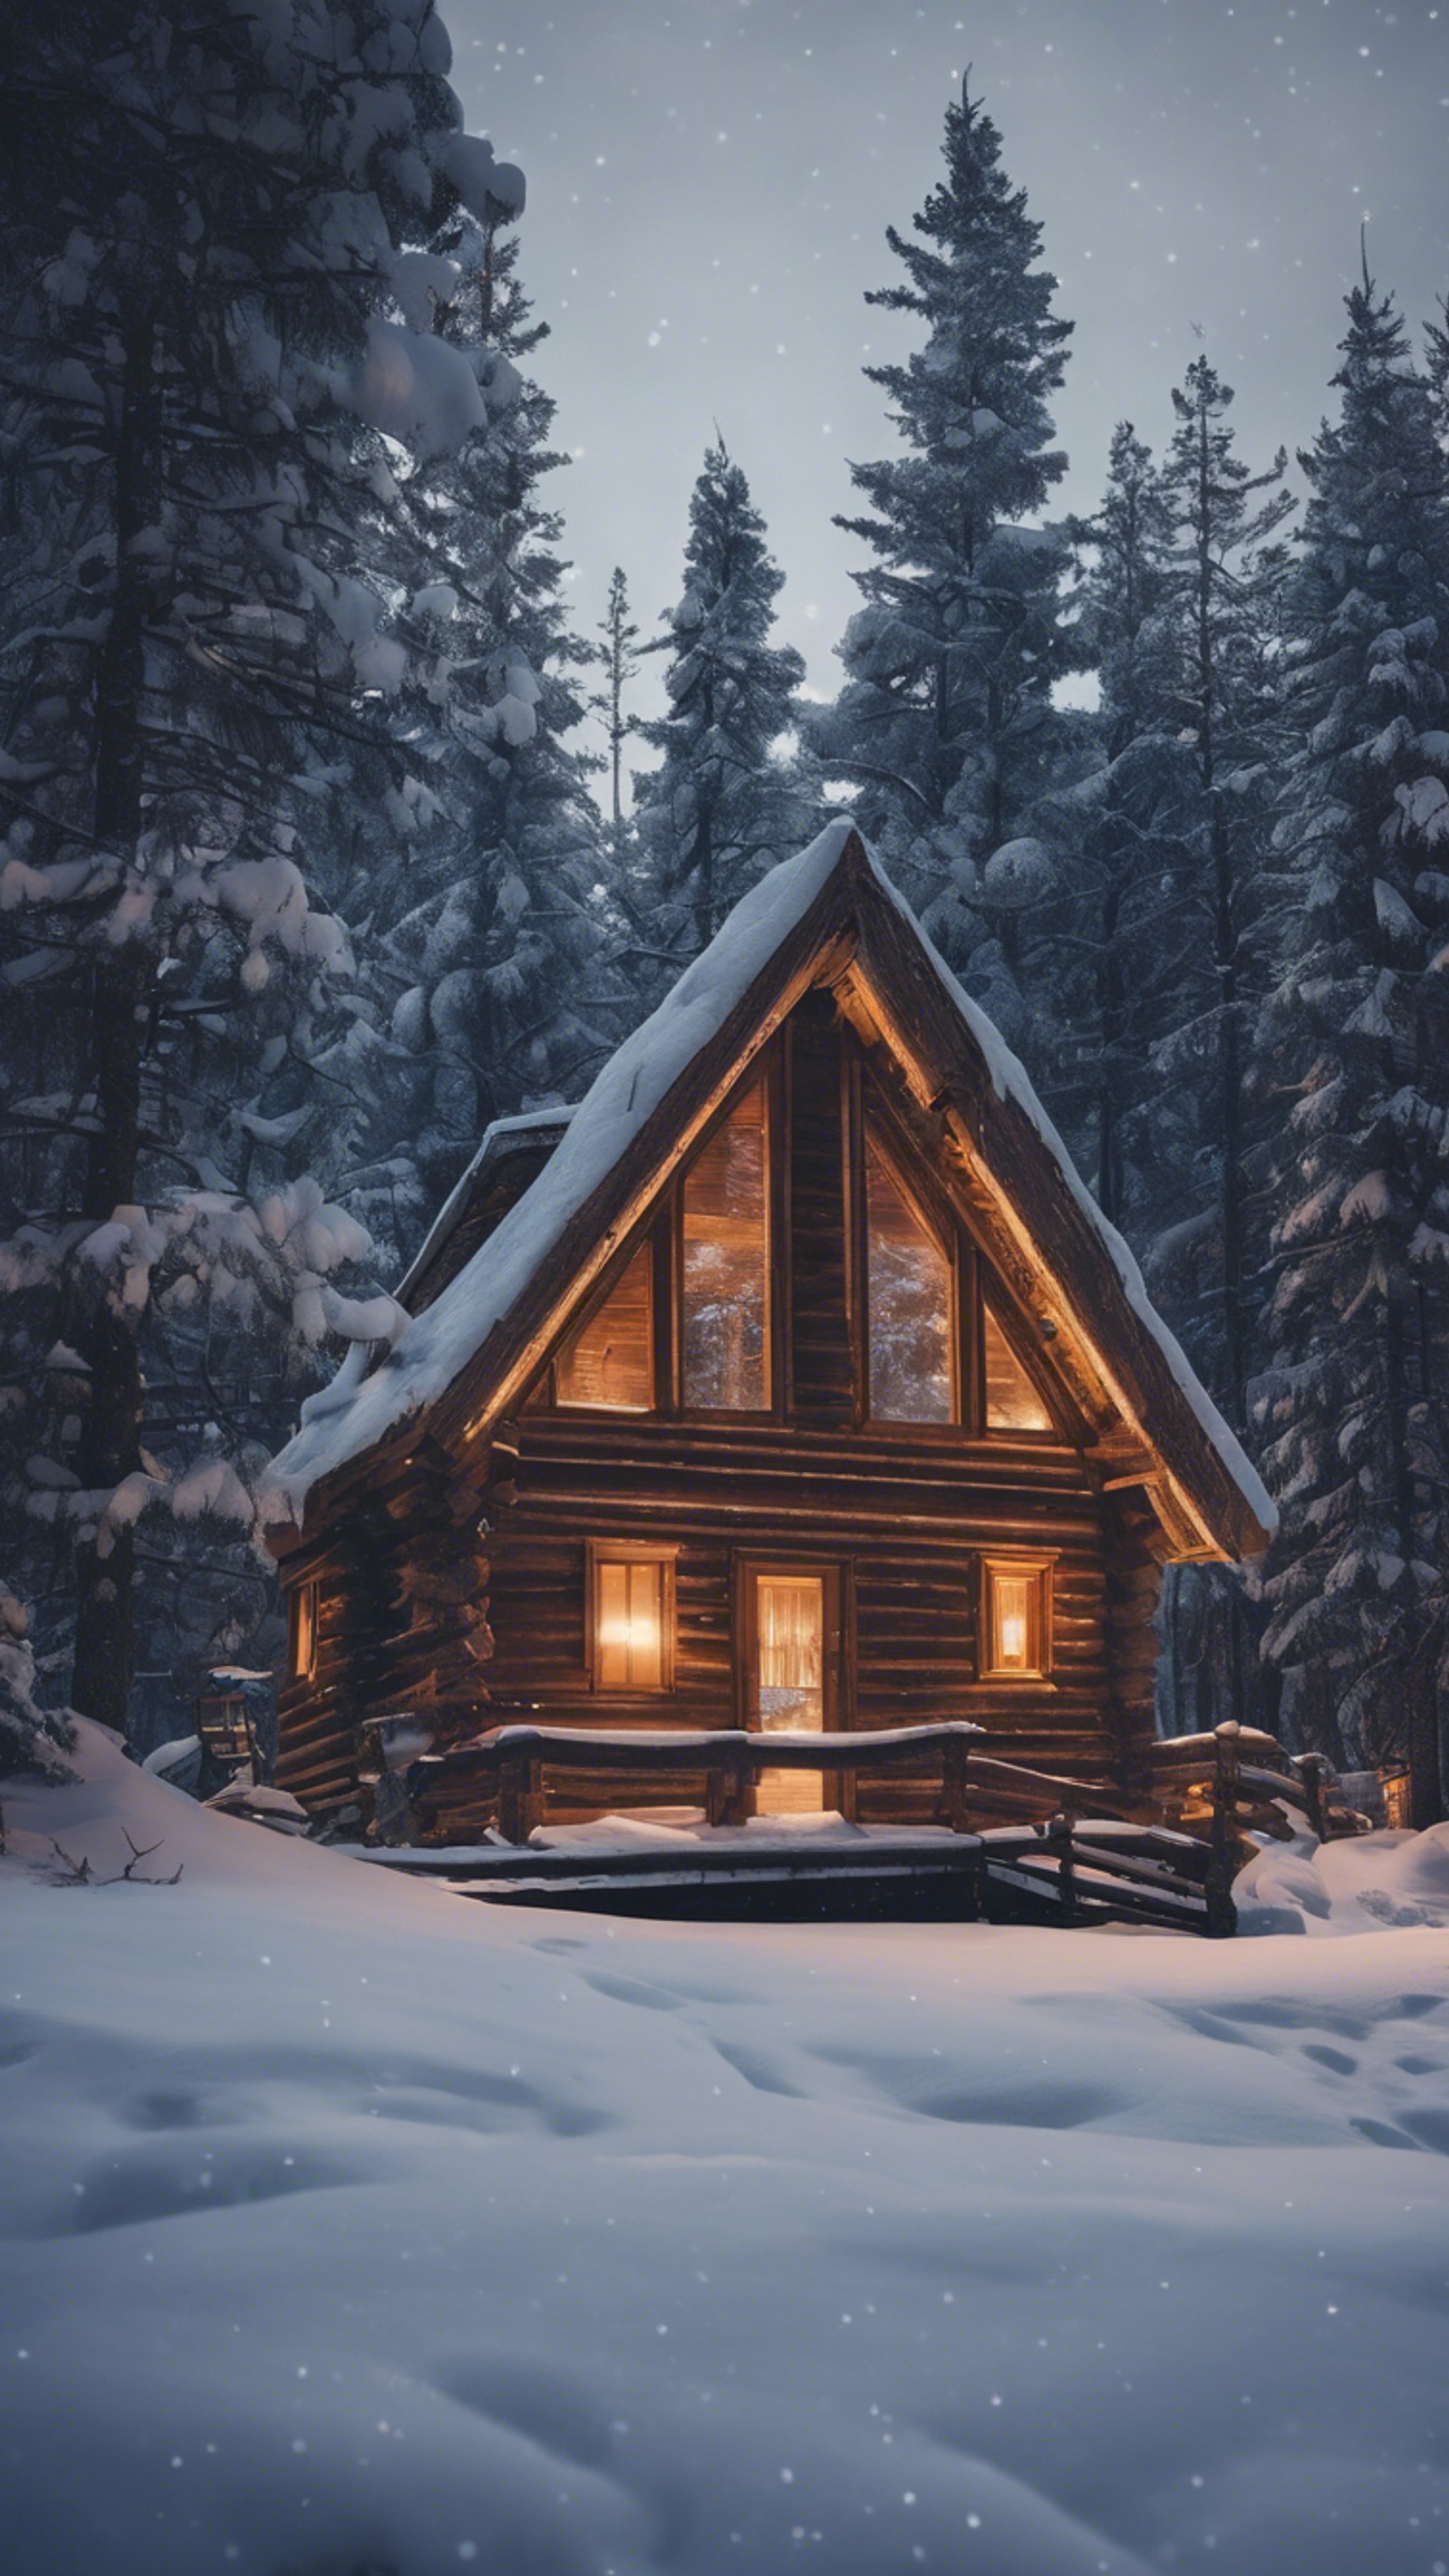 “A cozy wooden cabin nestled in a snow-covered pine forest on a starlit winter night.” Wallpaper[fd99763ef7b6478fa15f]